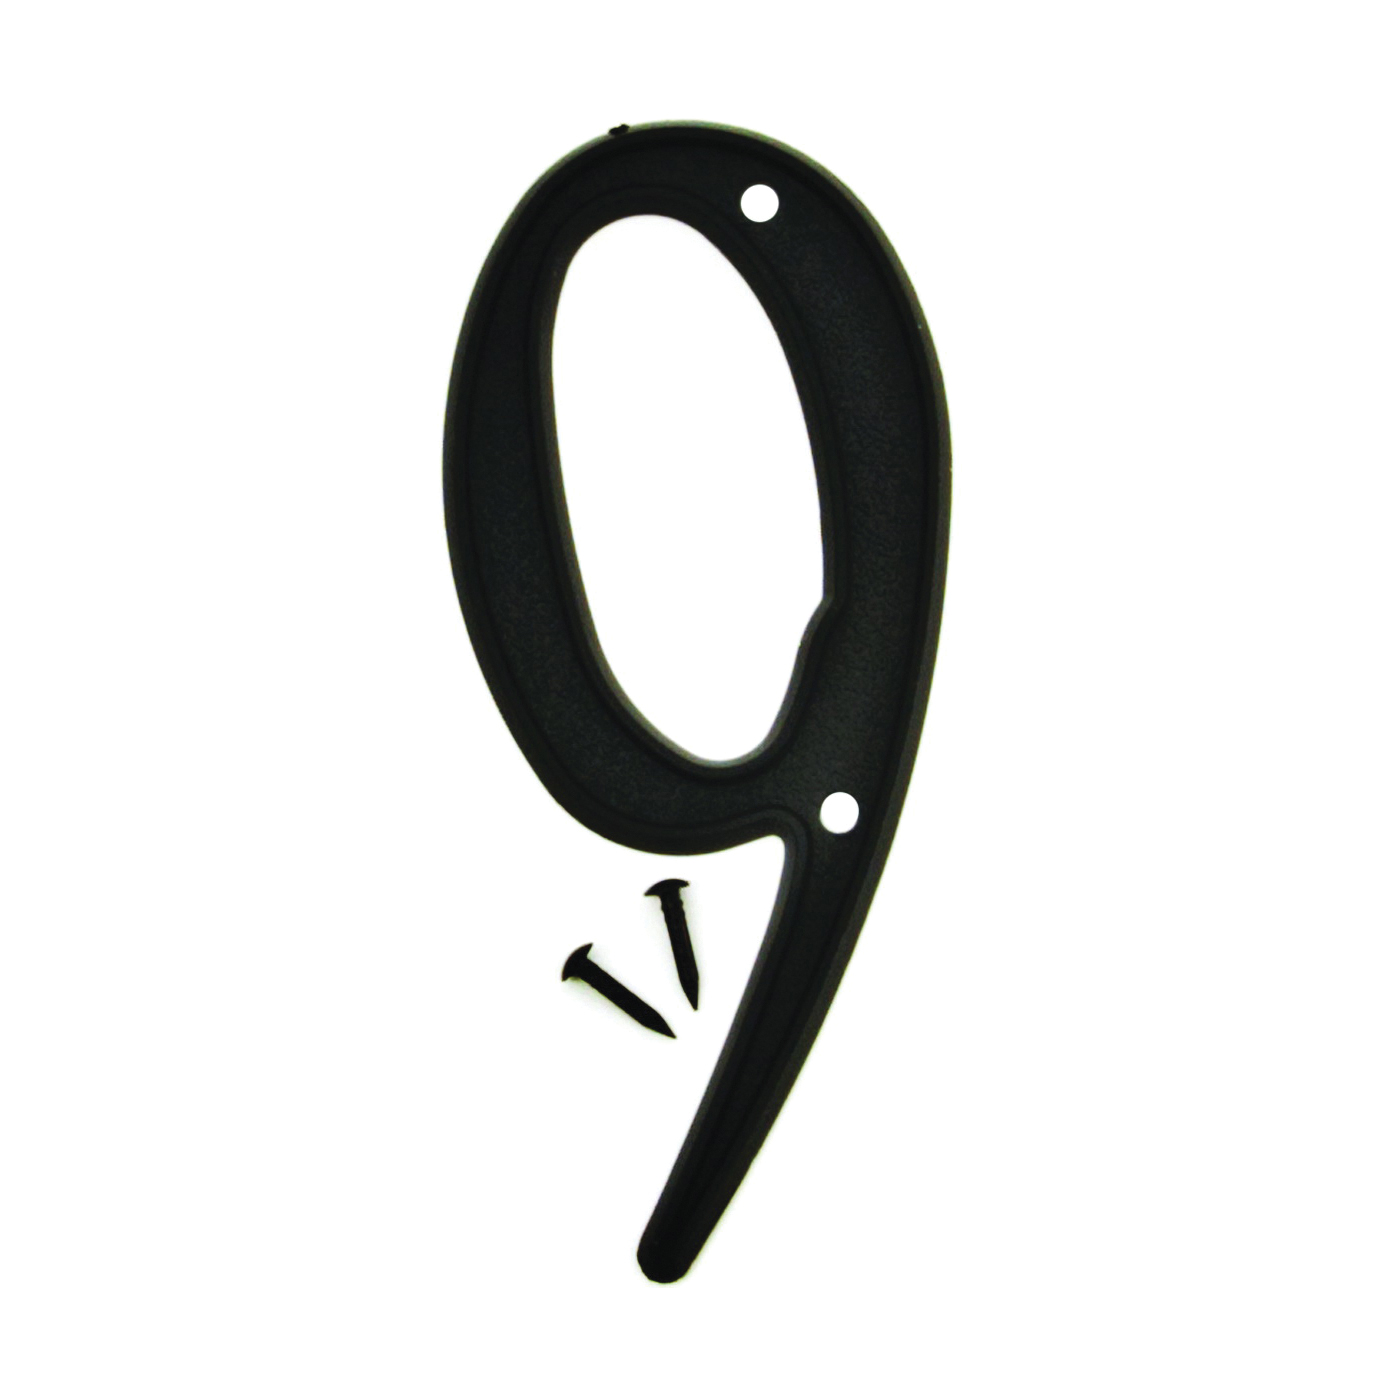 PN-29/9 House Number, Character: 9, 4 in H Character, Black Character, Plastic